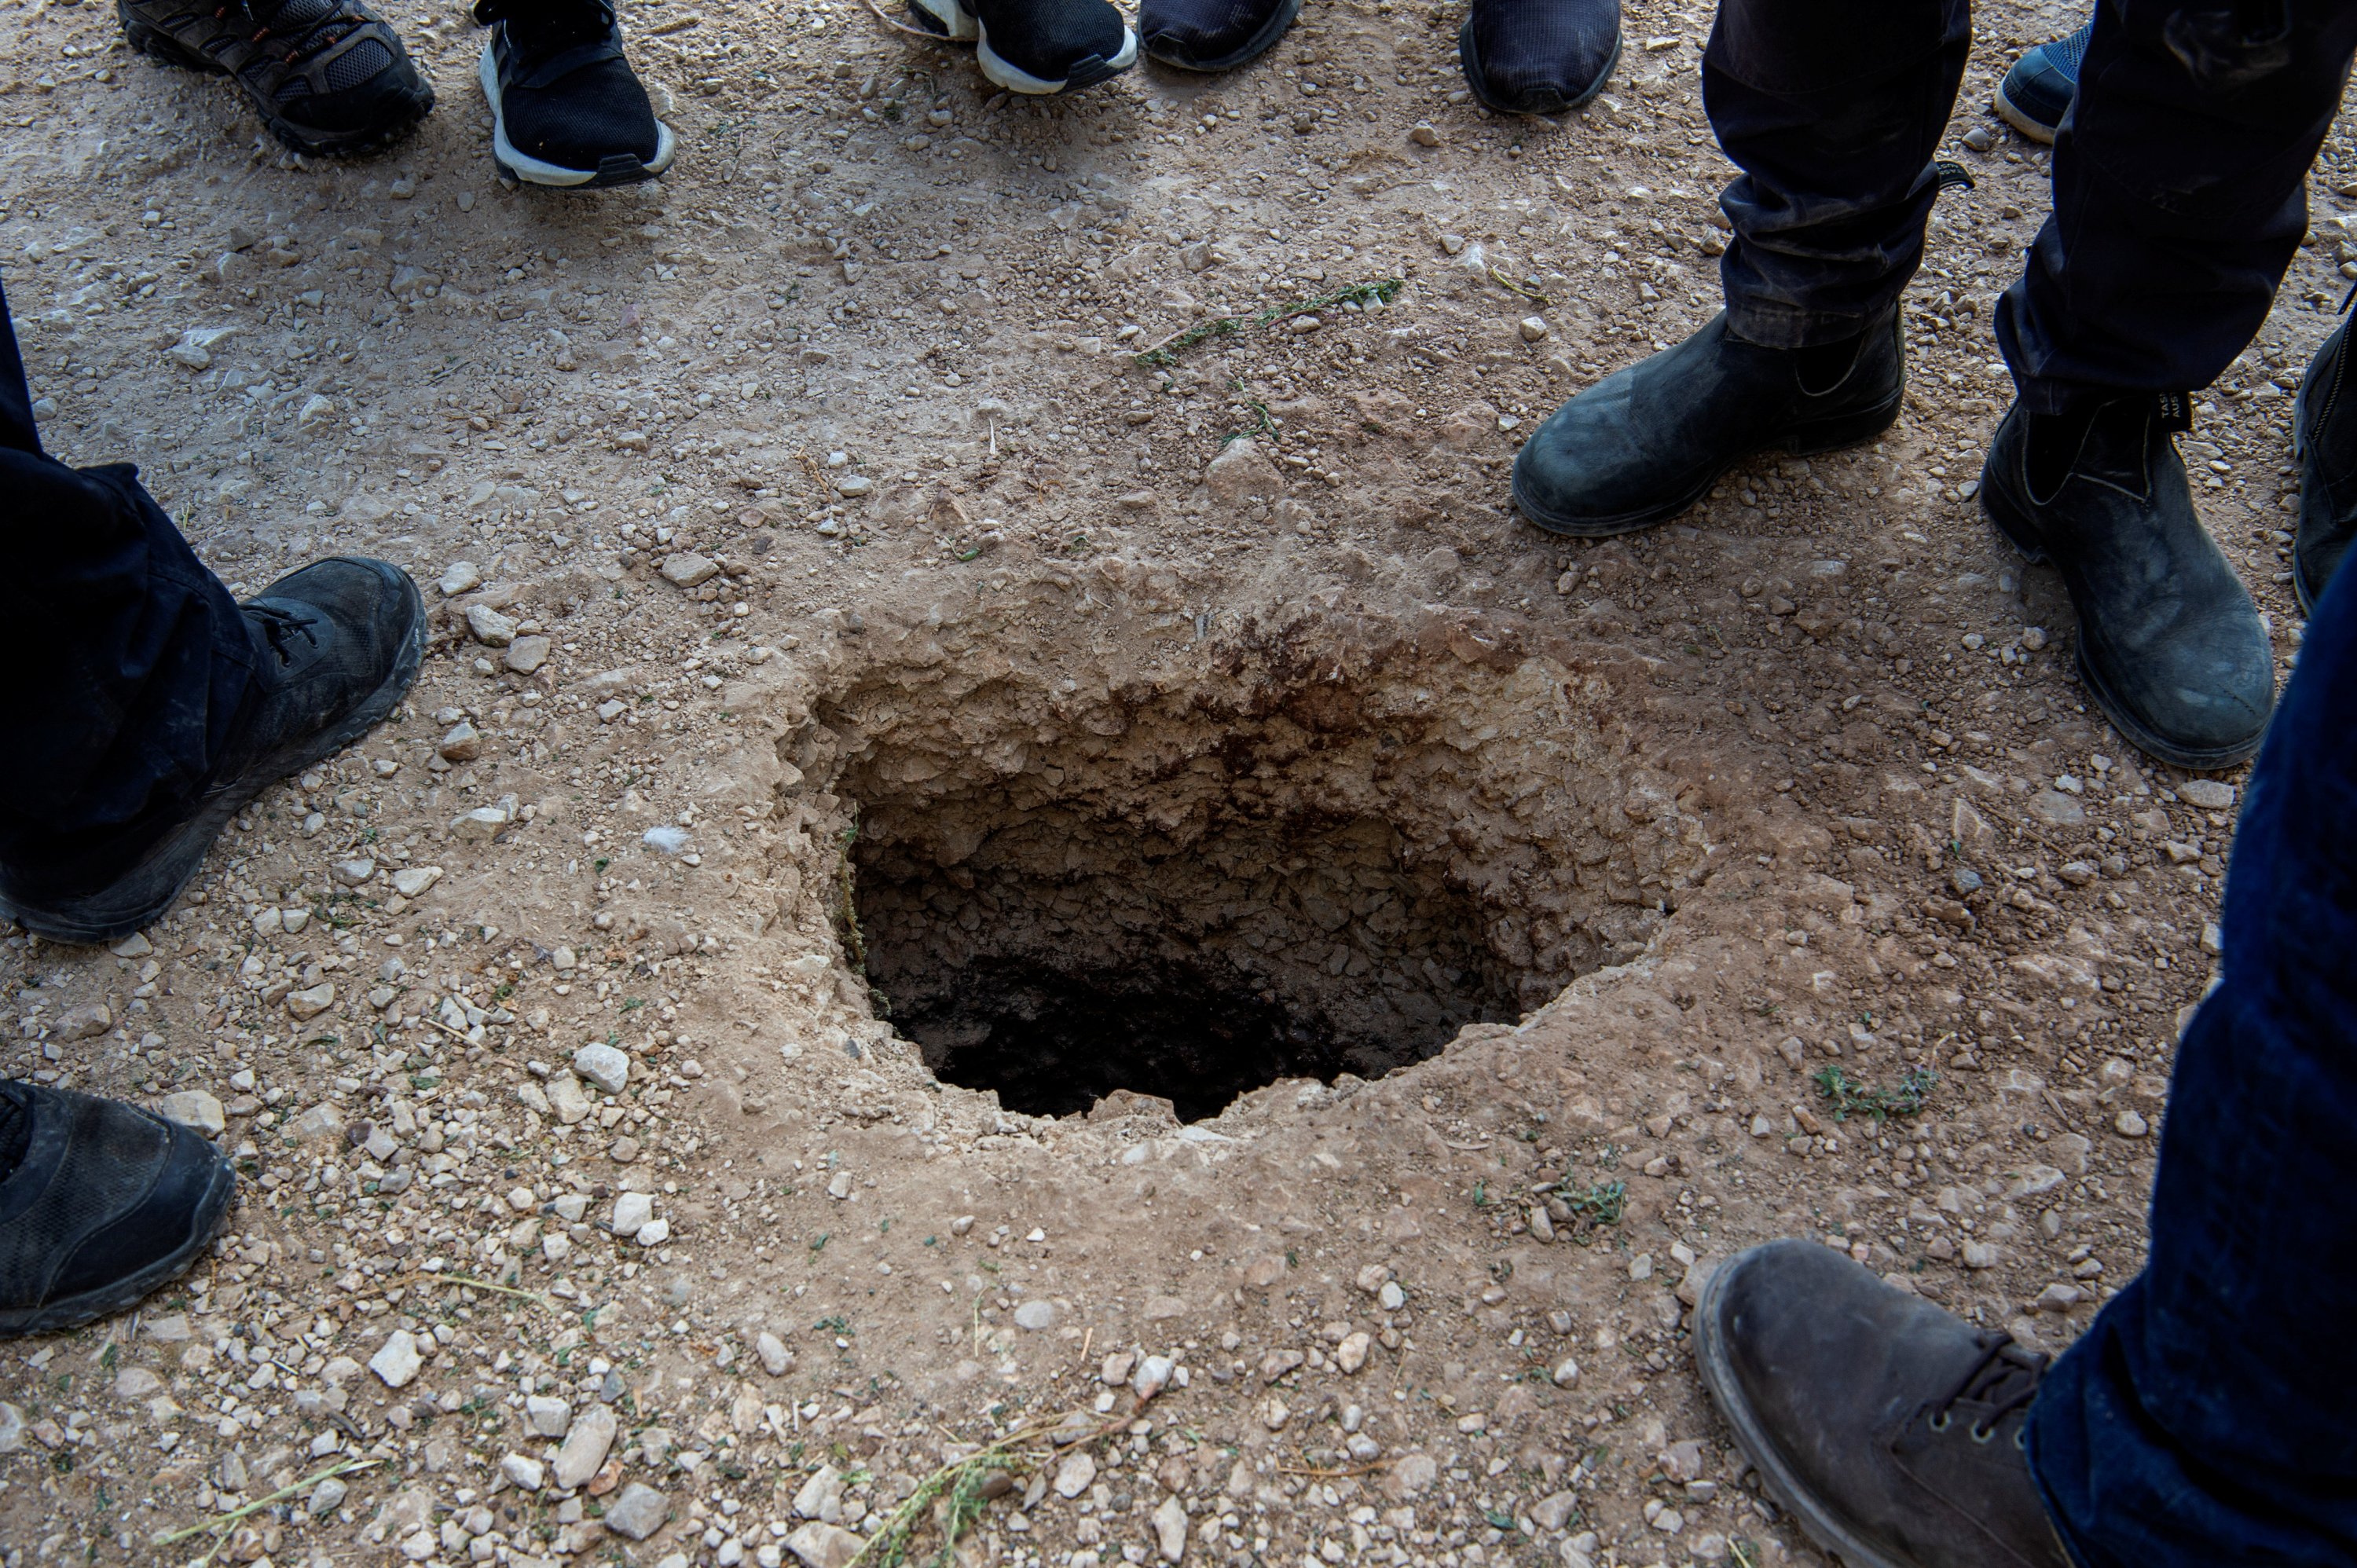 People stand by a hole in the ground outside the walls of Gilboa prison after six Palestinian militants broke out of it in north Israel September 6, 2021. (Reuters Photo)